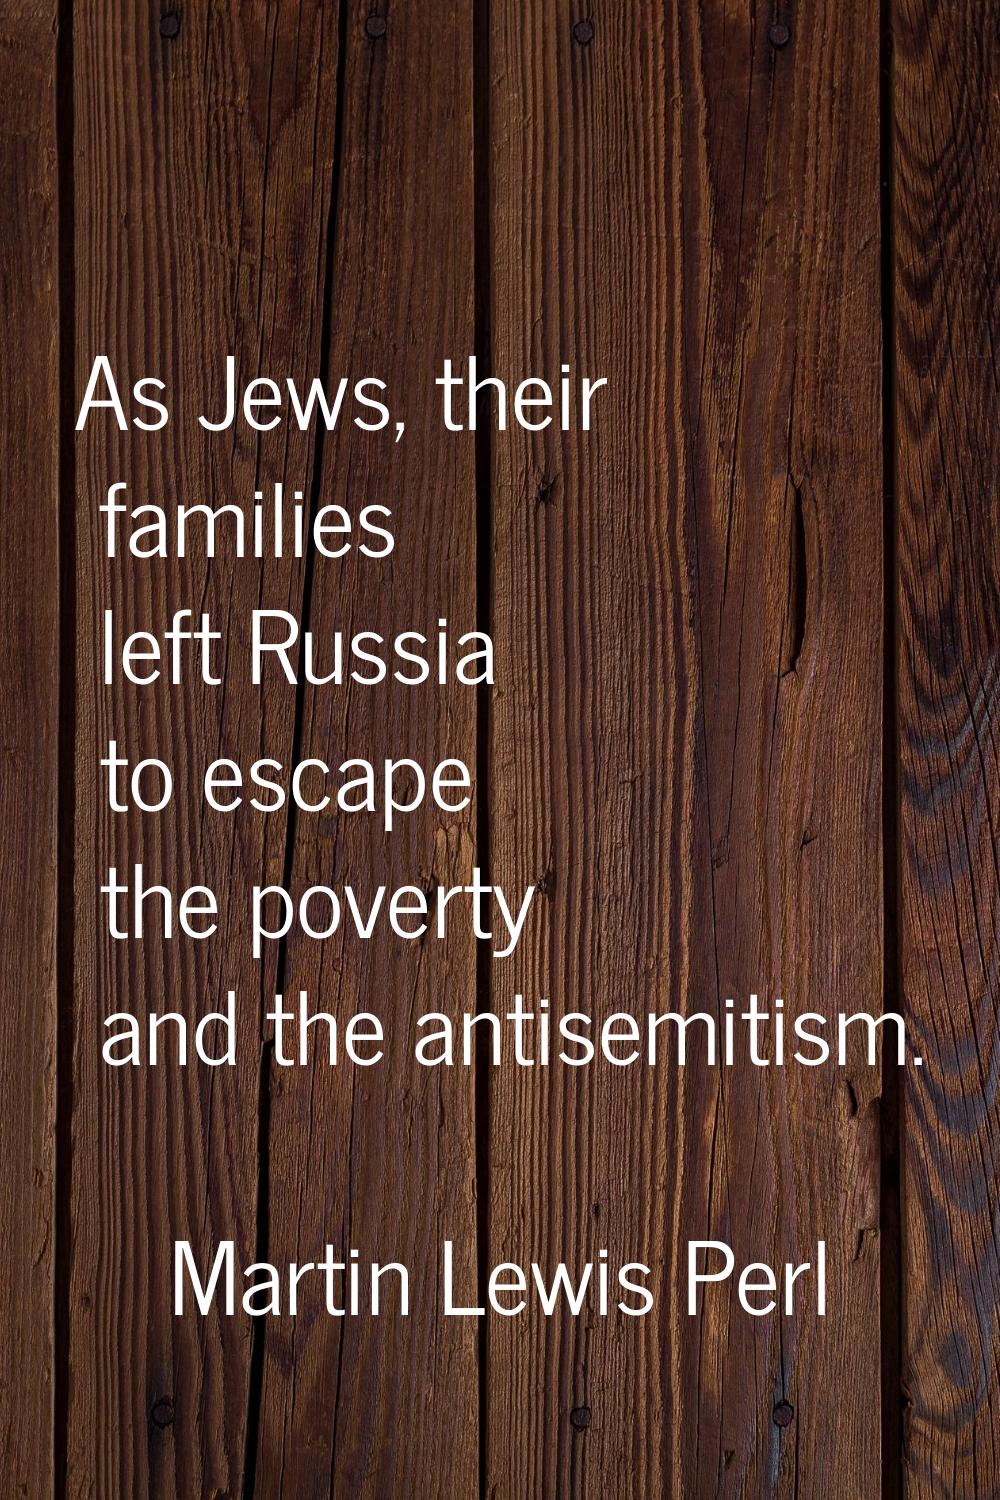 As Jews, their families left Russia to escape the poverty and the antisemitism.